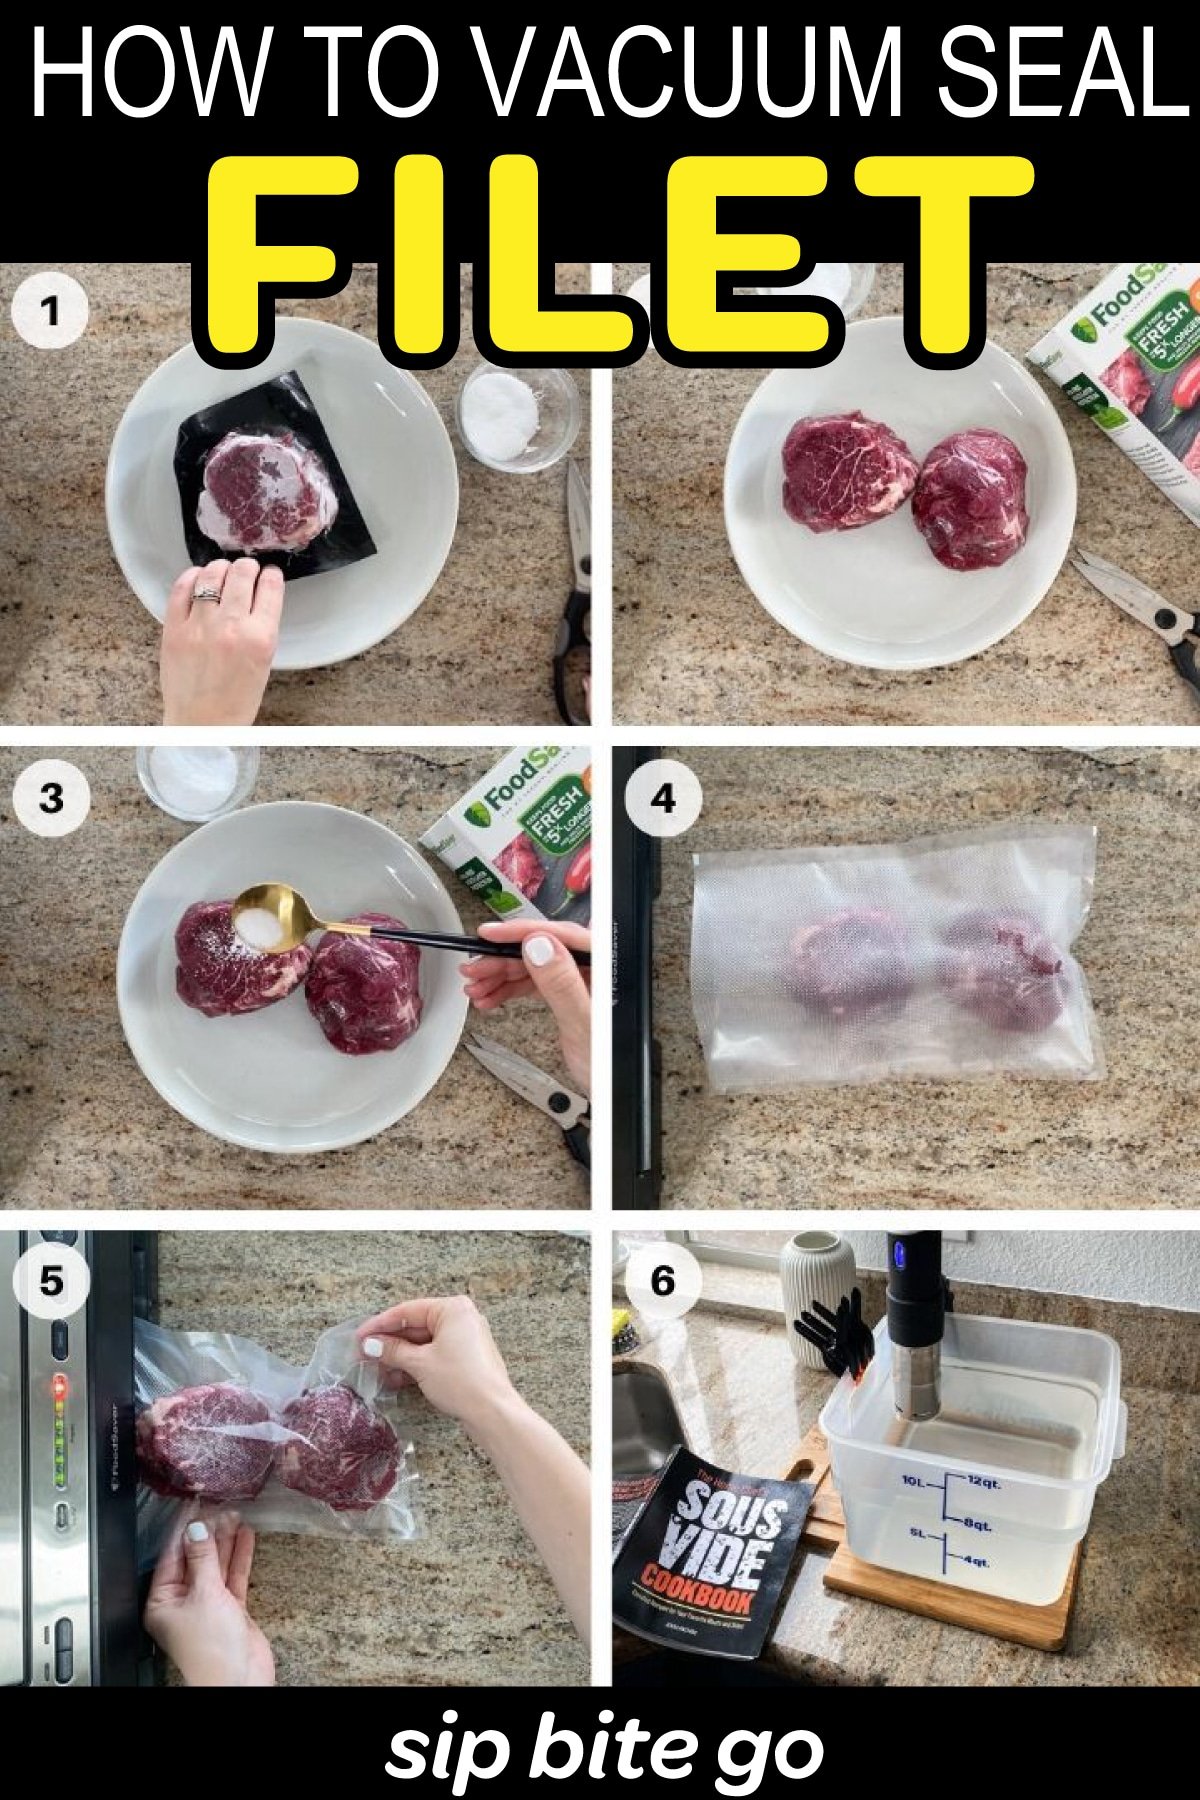 vacuum seal filet mignon step by step guide with The Home Chef's Sous Vide Cookbook